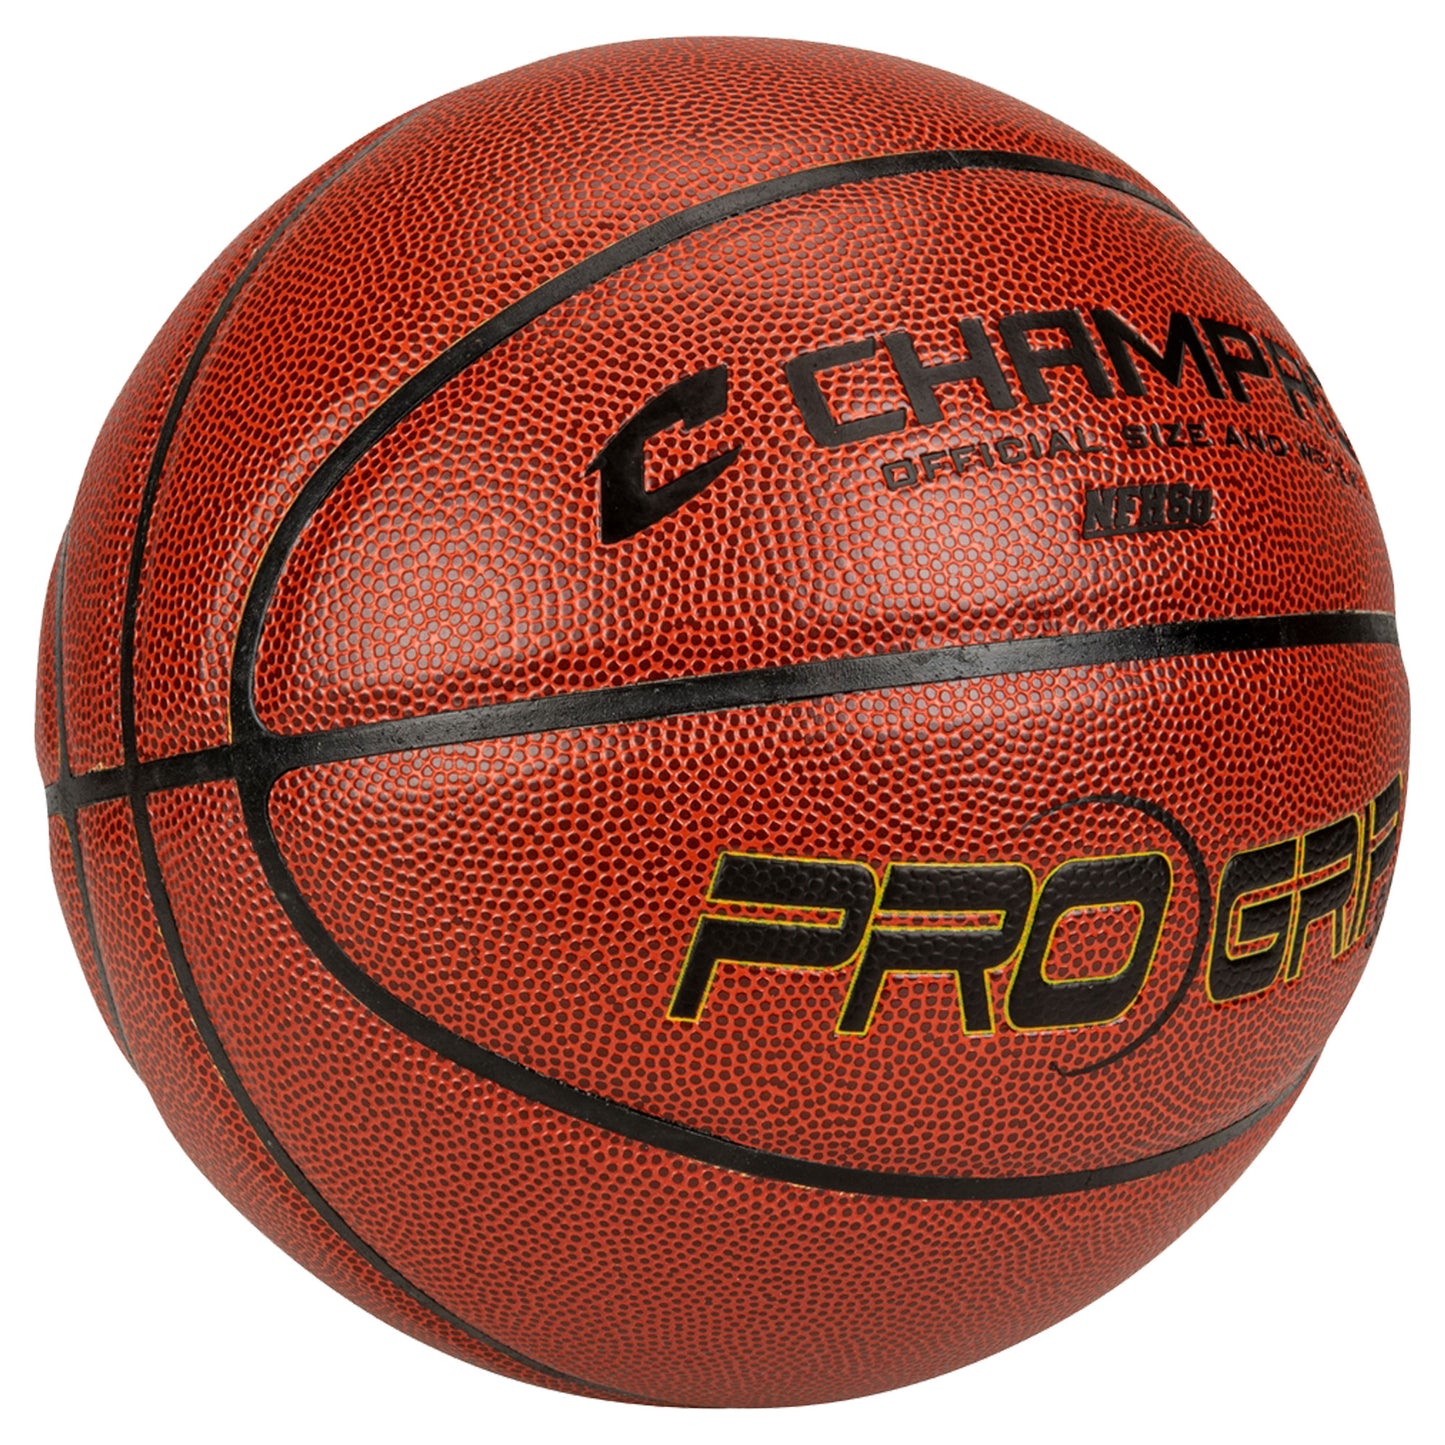 Champro Sports Progrip 3000 High Performance Indoor Composite Basketball